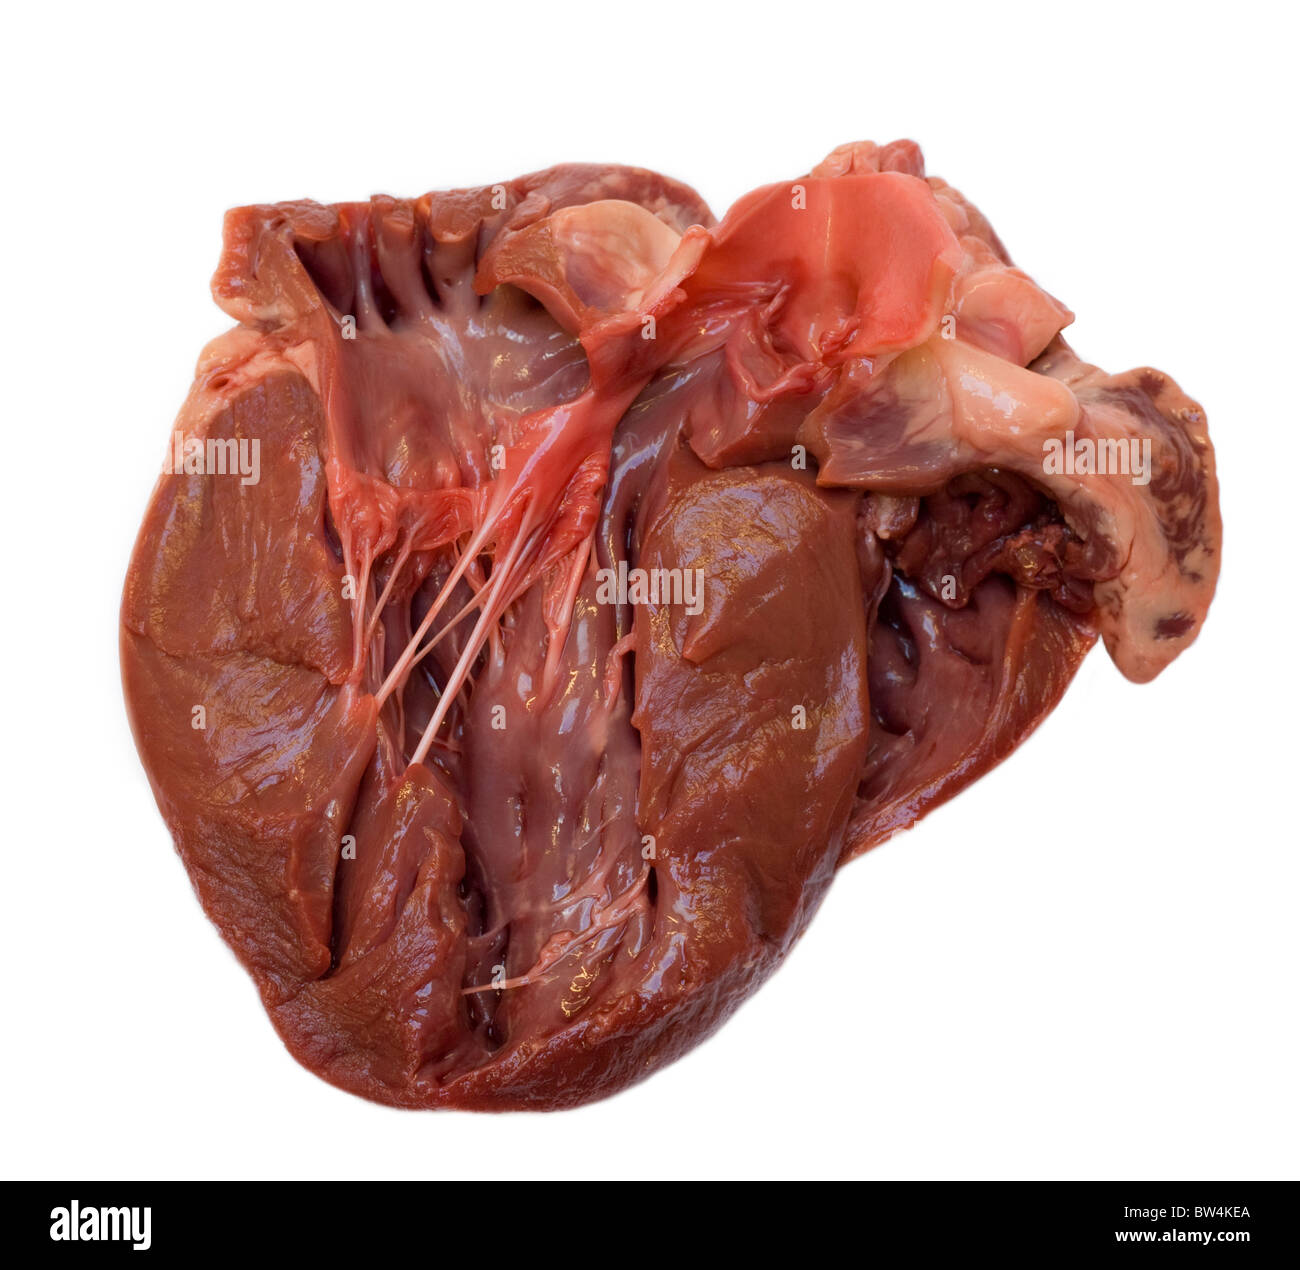 Cross section through a raw swine heart, showing muscle, chambers, and valves Stock Photo